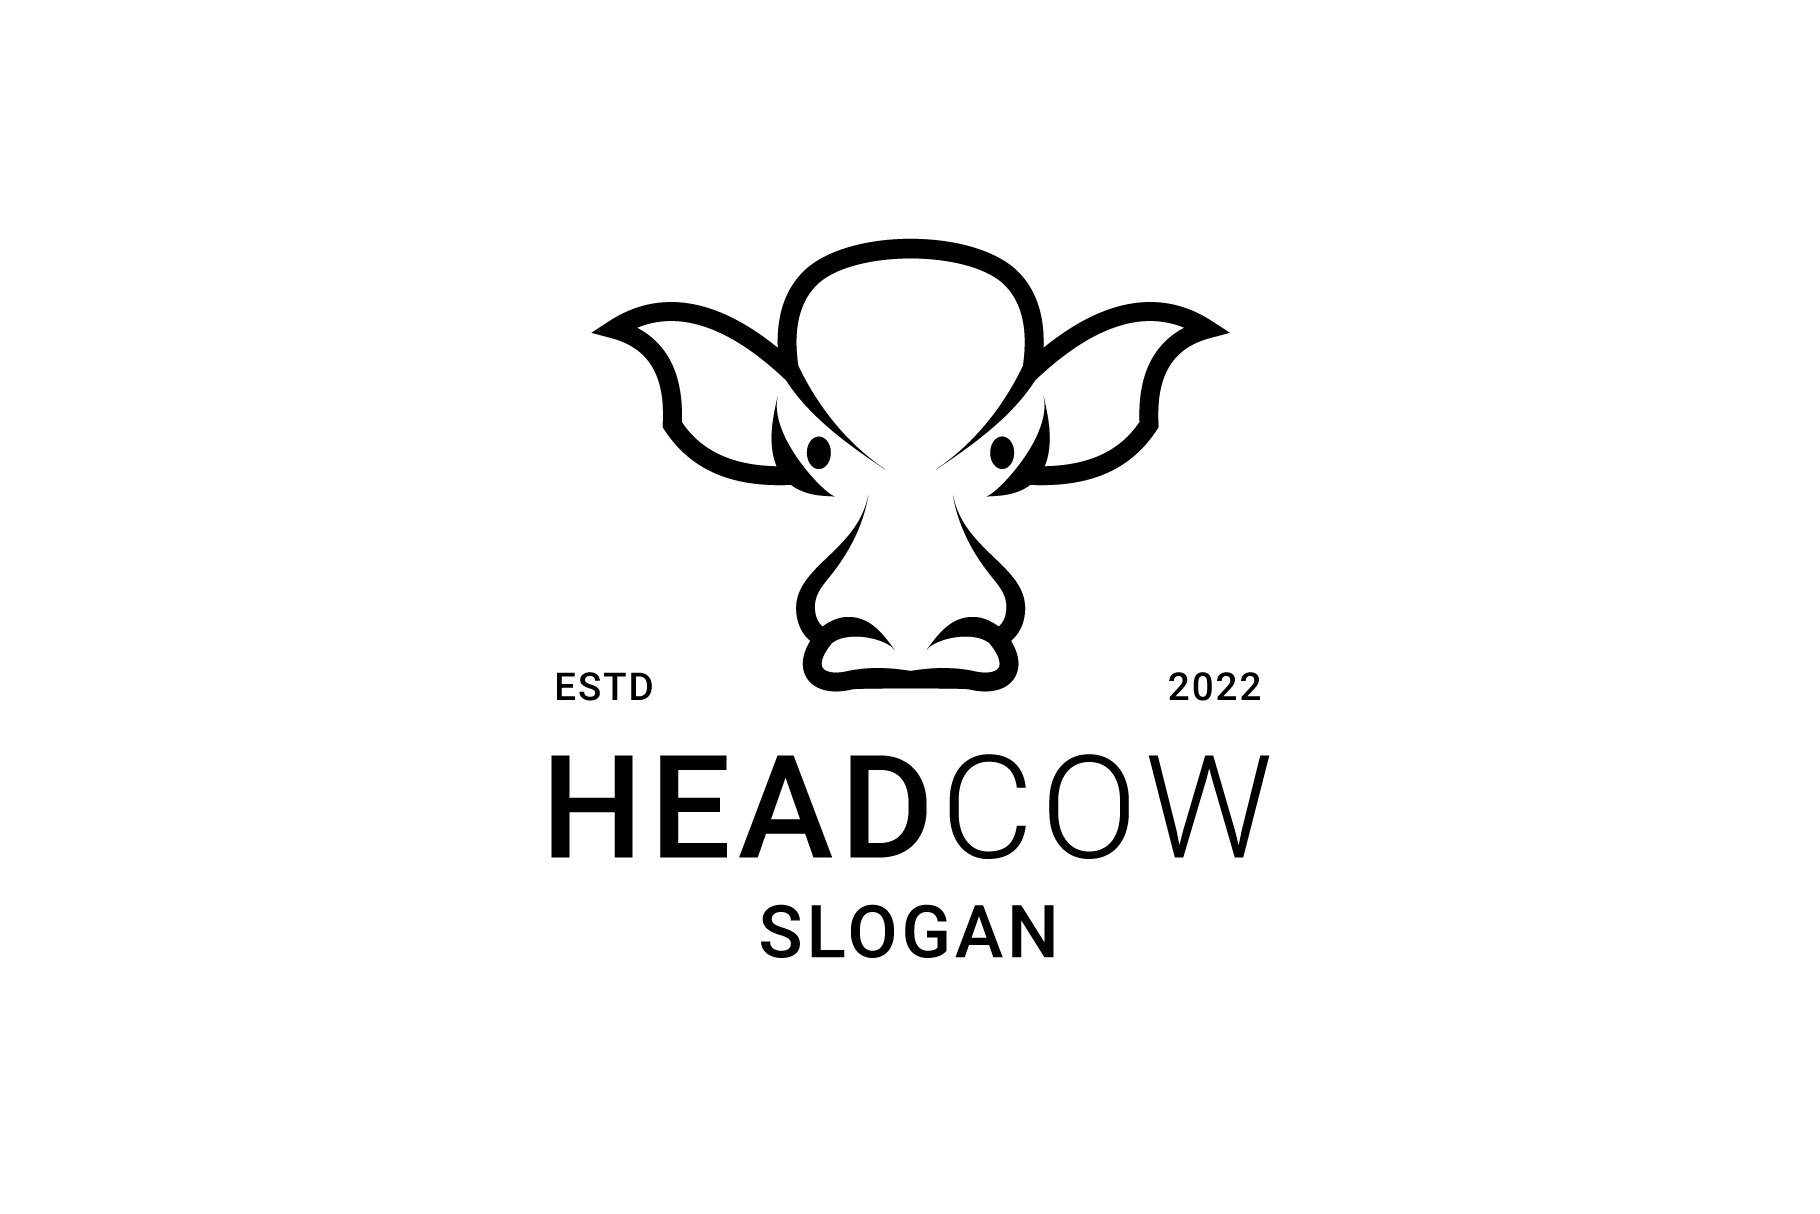 Minimalistic design of the angry cow for the logo.